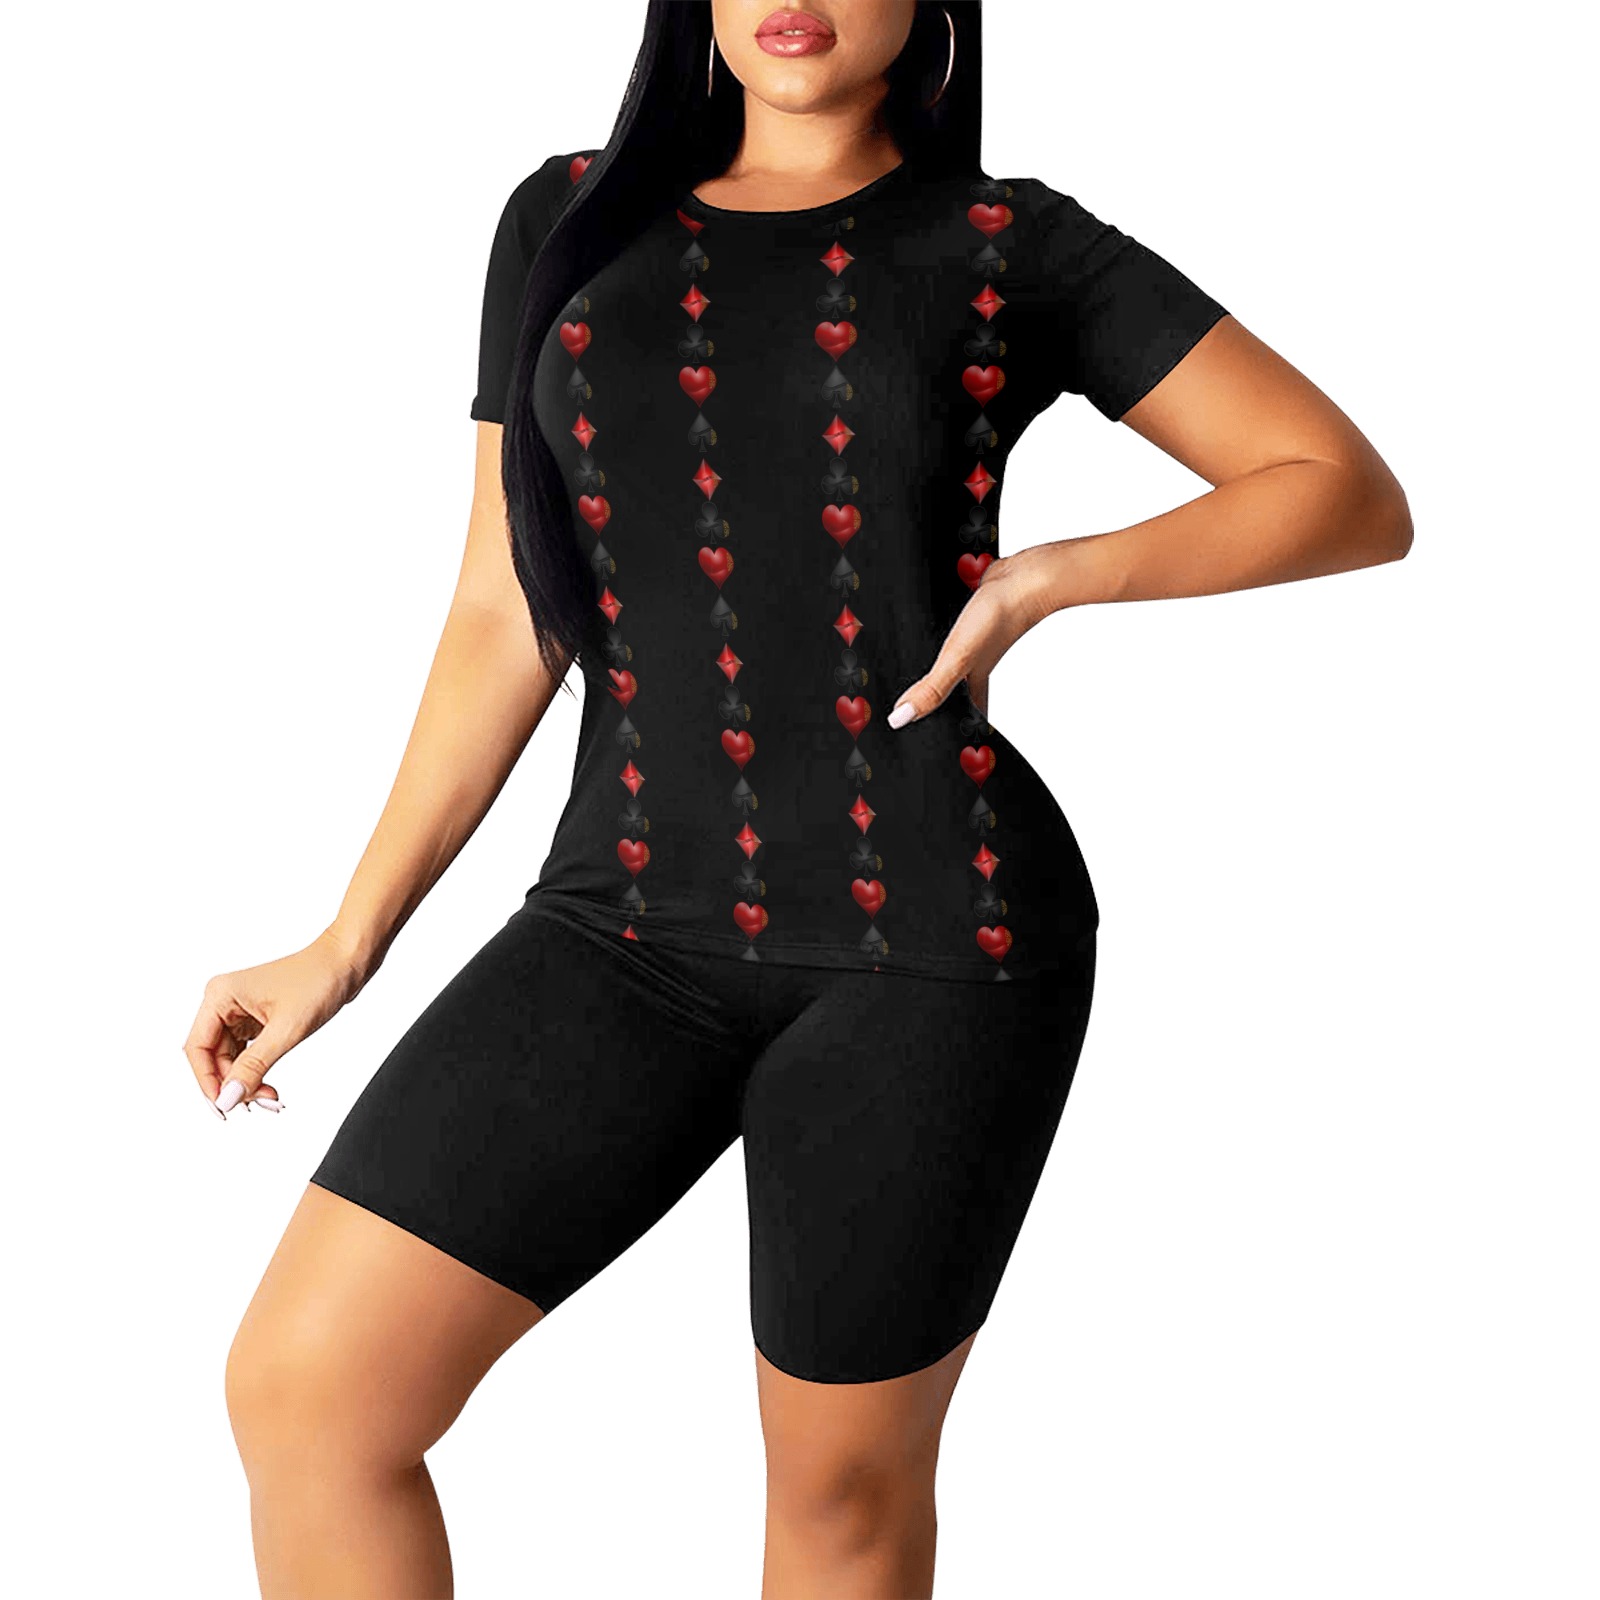 Black and Red Casino Card Shapes on Black Women's Short Yoga Set